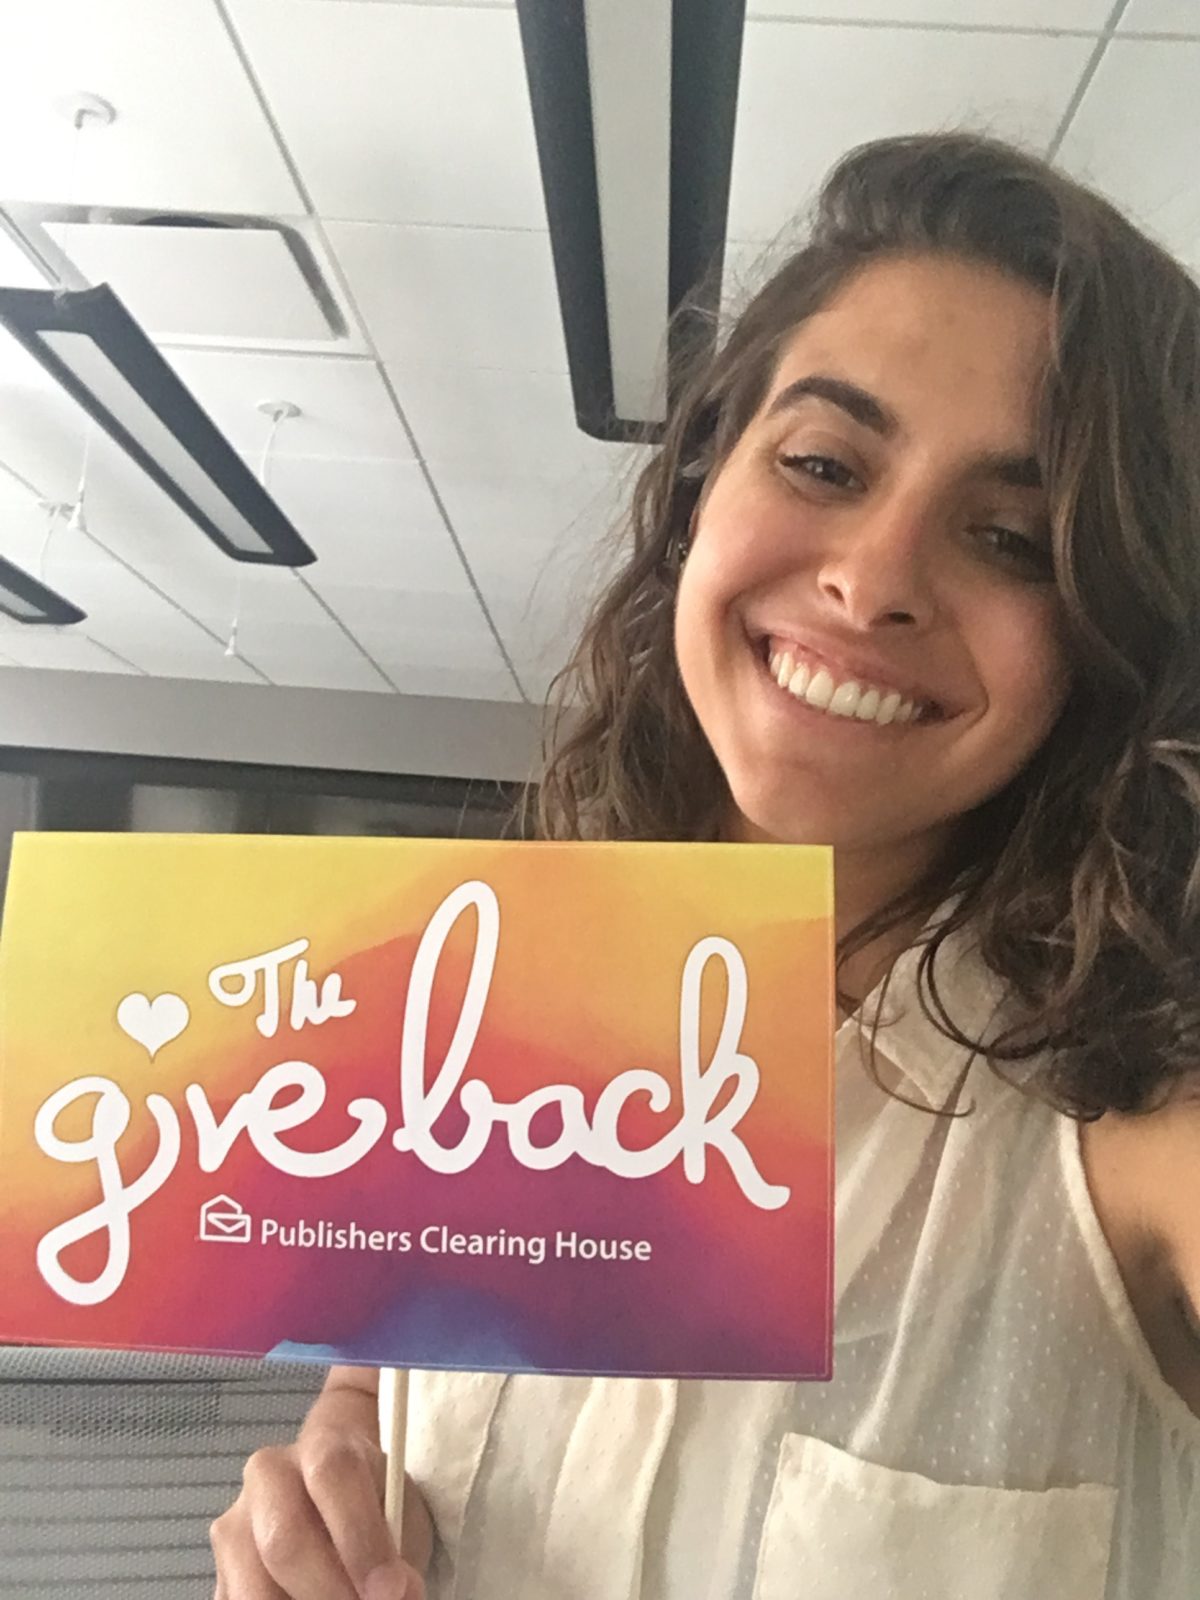 Behind The Scenes: The GiveBack Photobooth